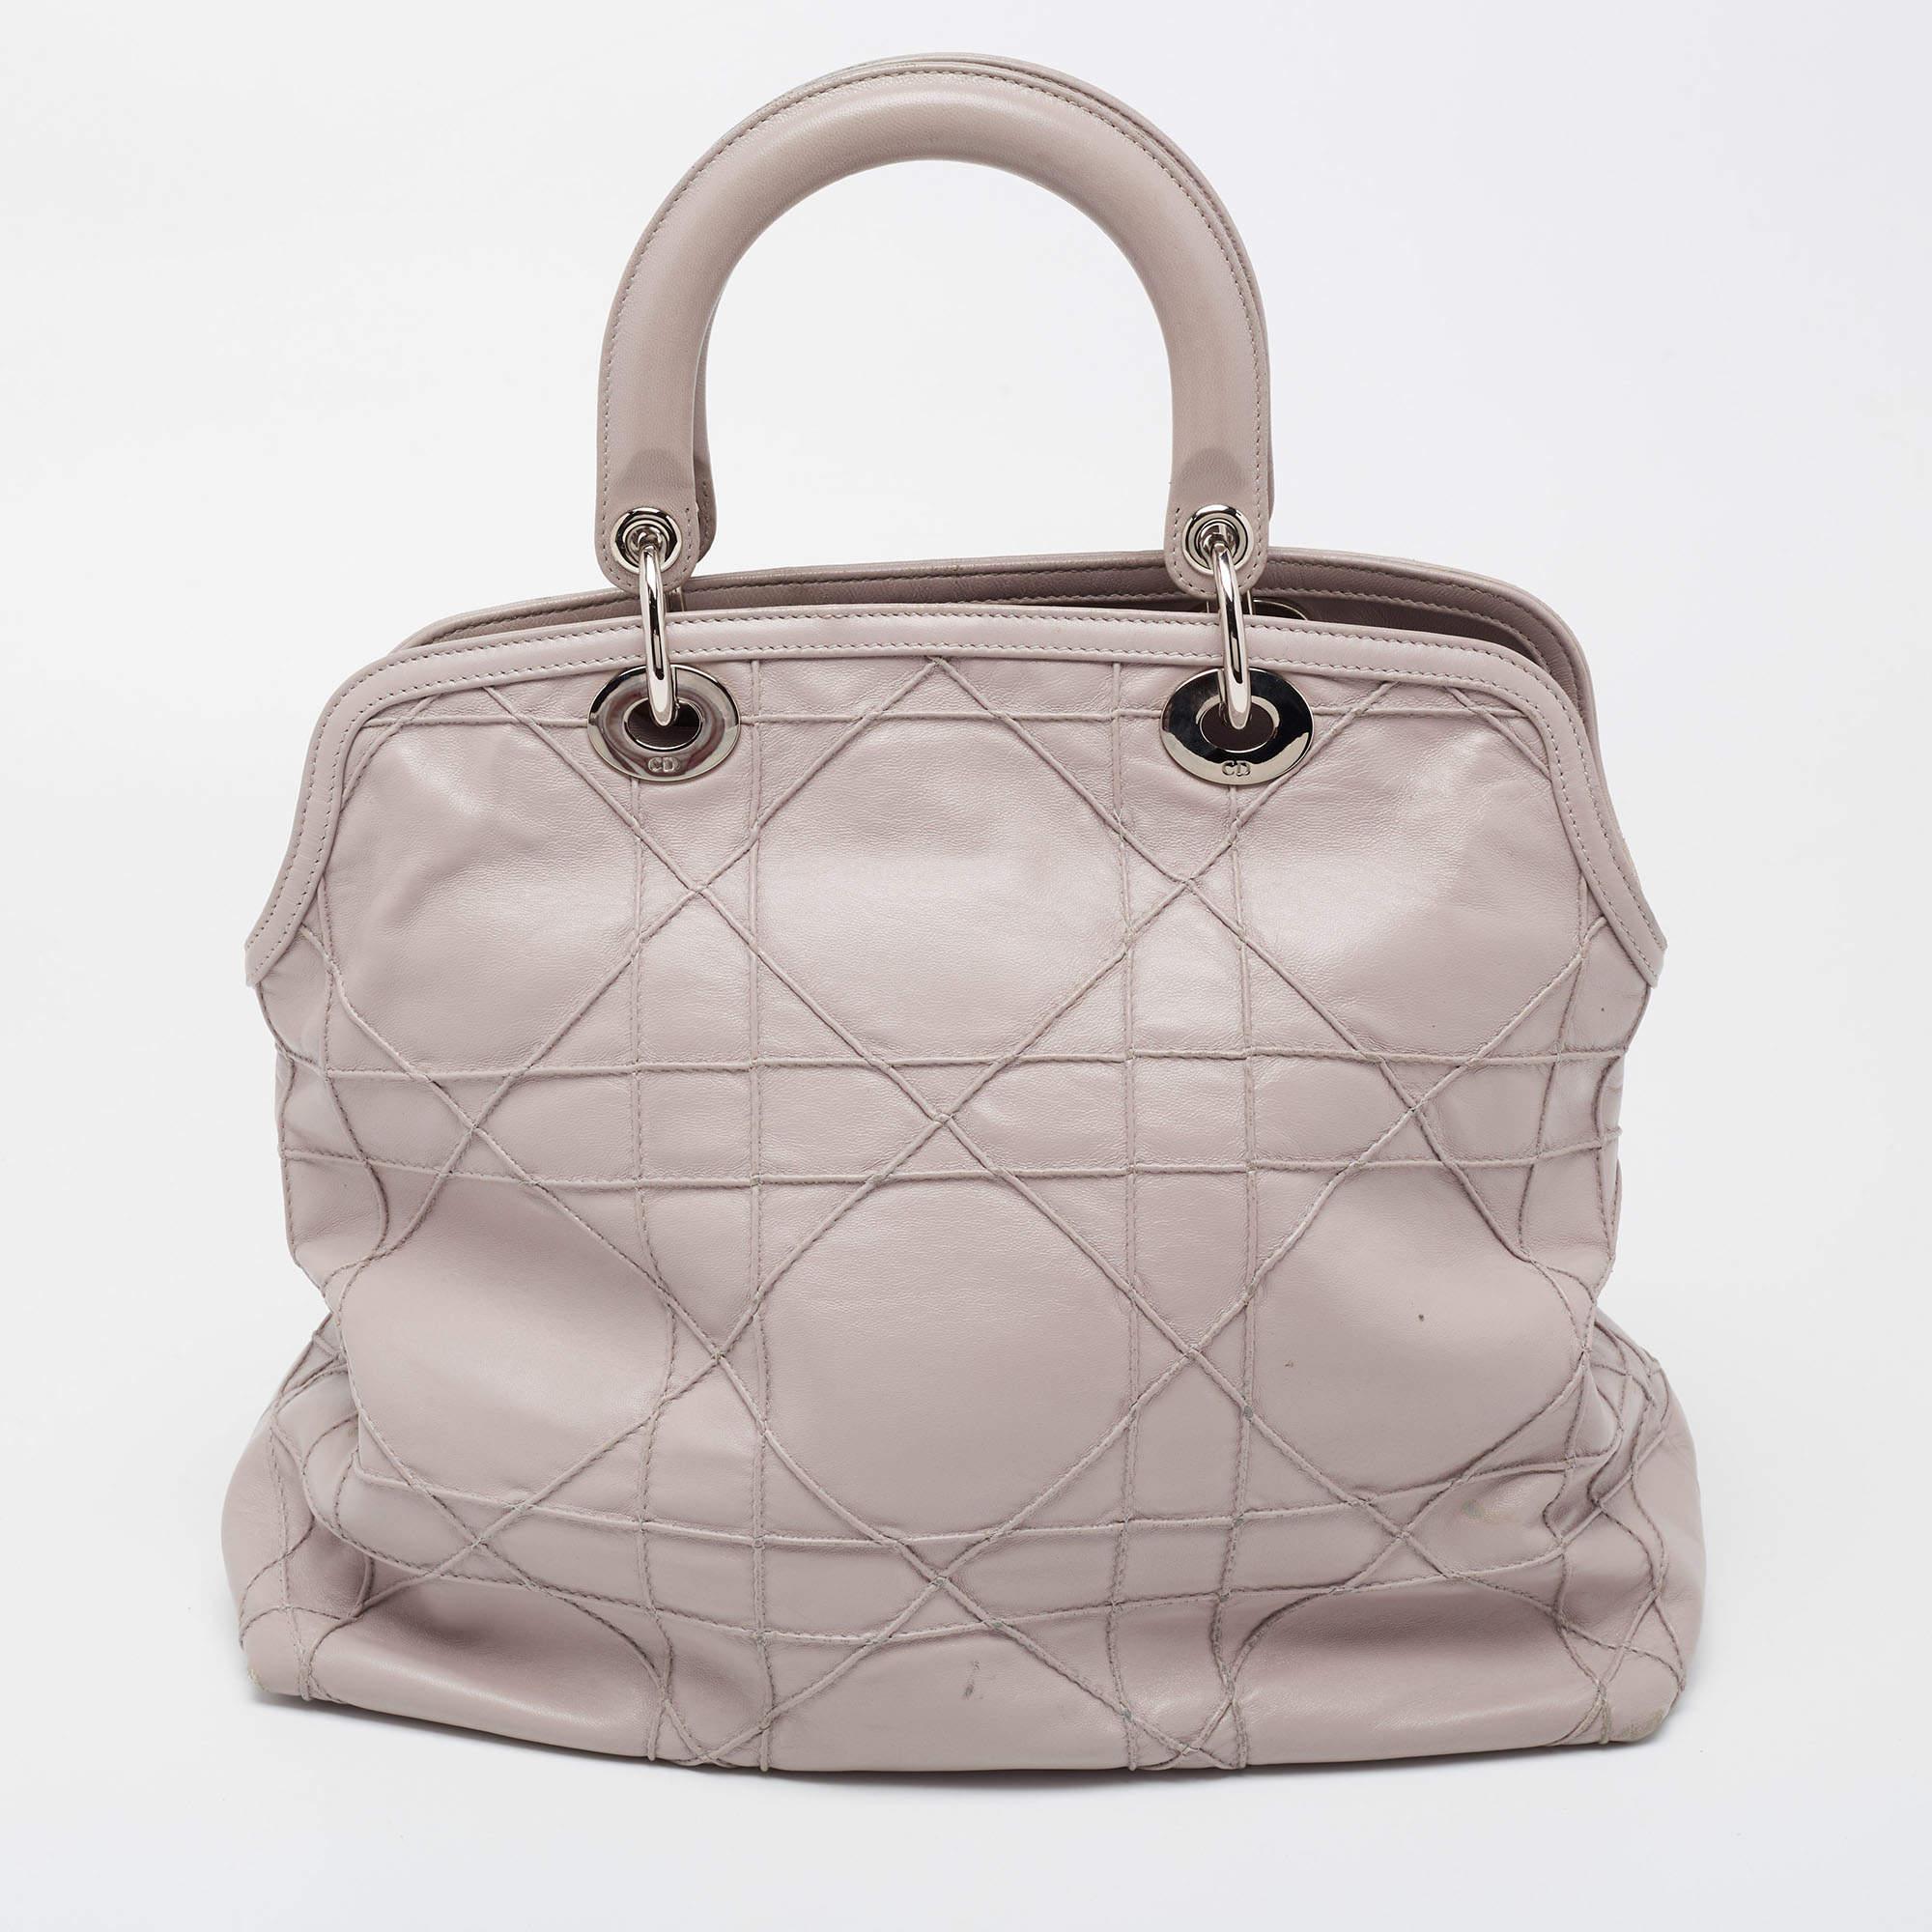 From the house of Dior, this stunning Granville tote is a true statement accessory. Arriving in Taupe leather, it gets a distinctive look with the signature Cannage quilt. It features double leather top handles and the dangling DIOR charms at the